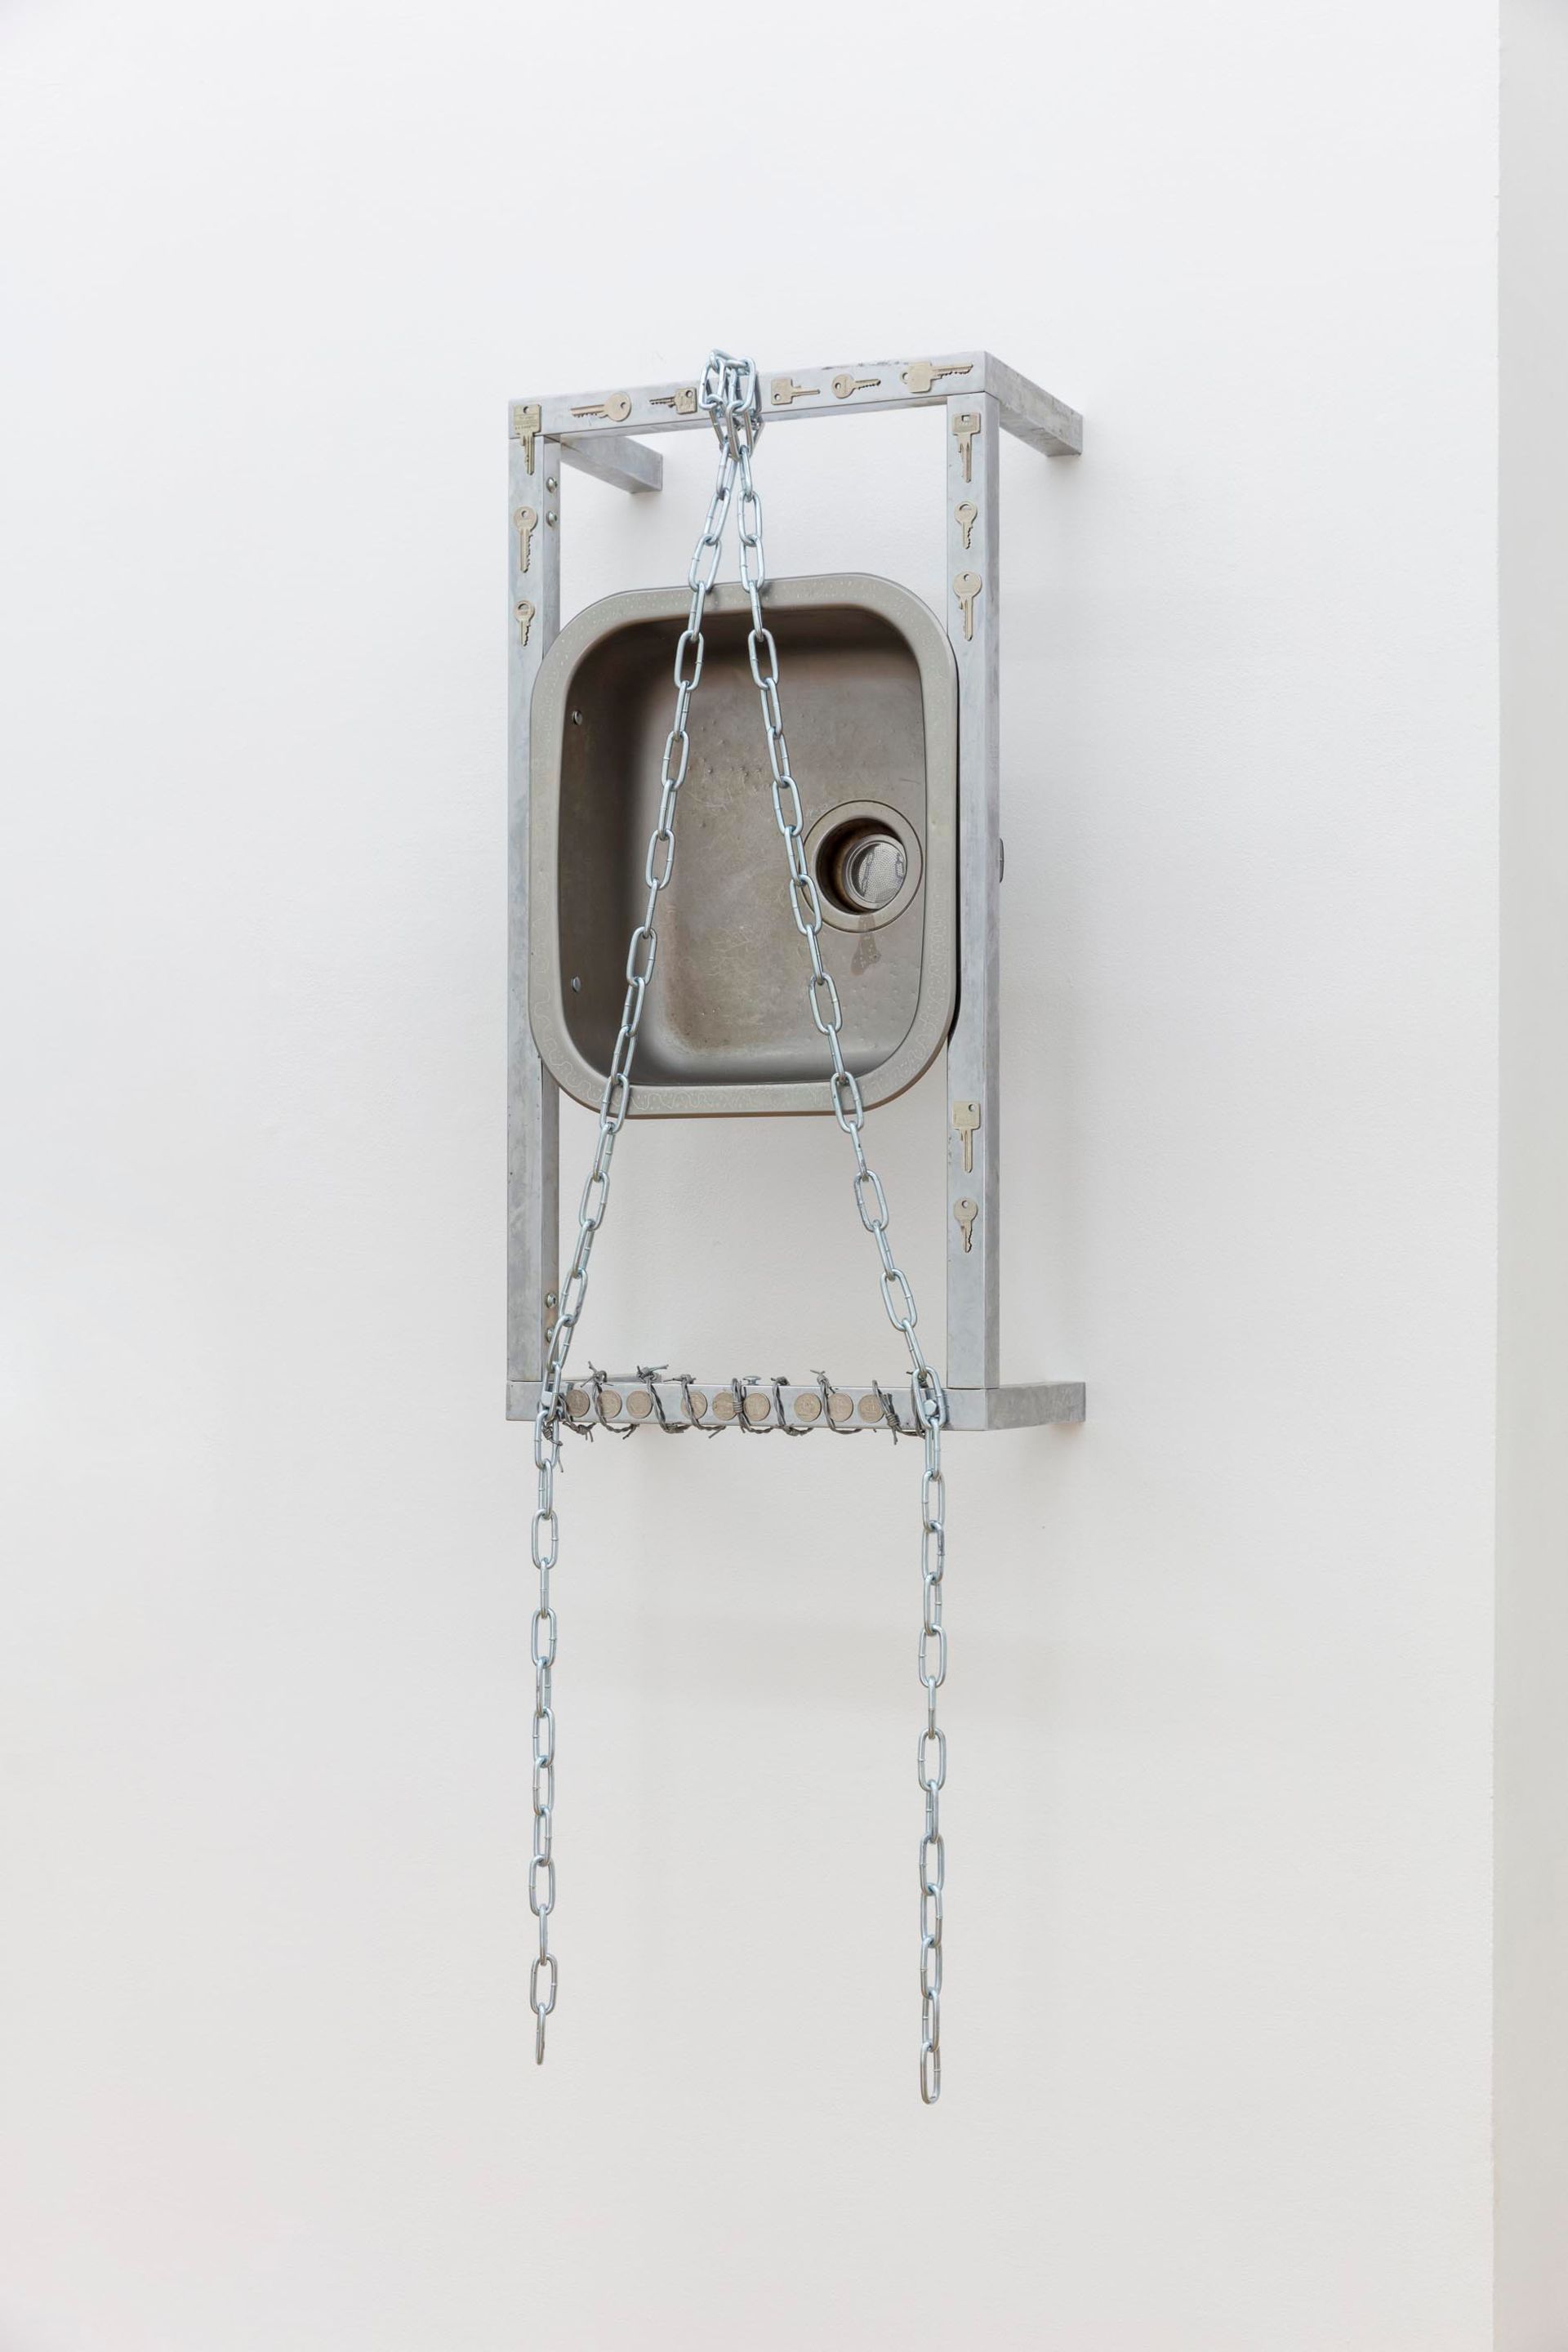 Anna McCarthy, “Shackles / Kitchen”, 2022, stainless steel, chrome, leather, coins, glue, bolts, wire, keys, 145 × 44.5 × 26.5cm